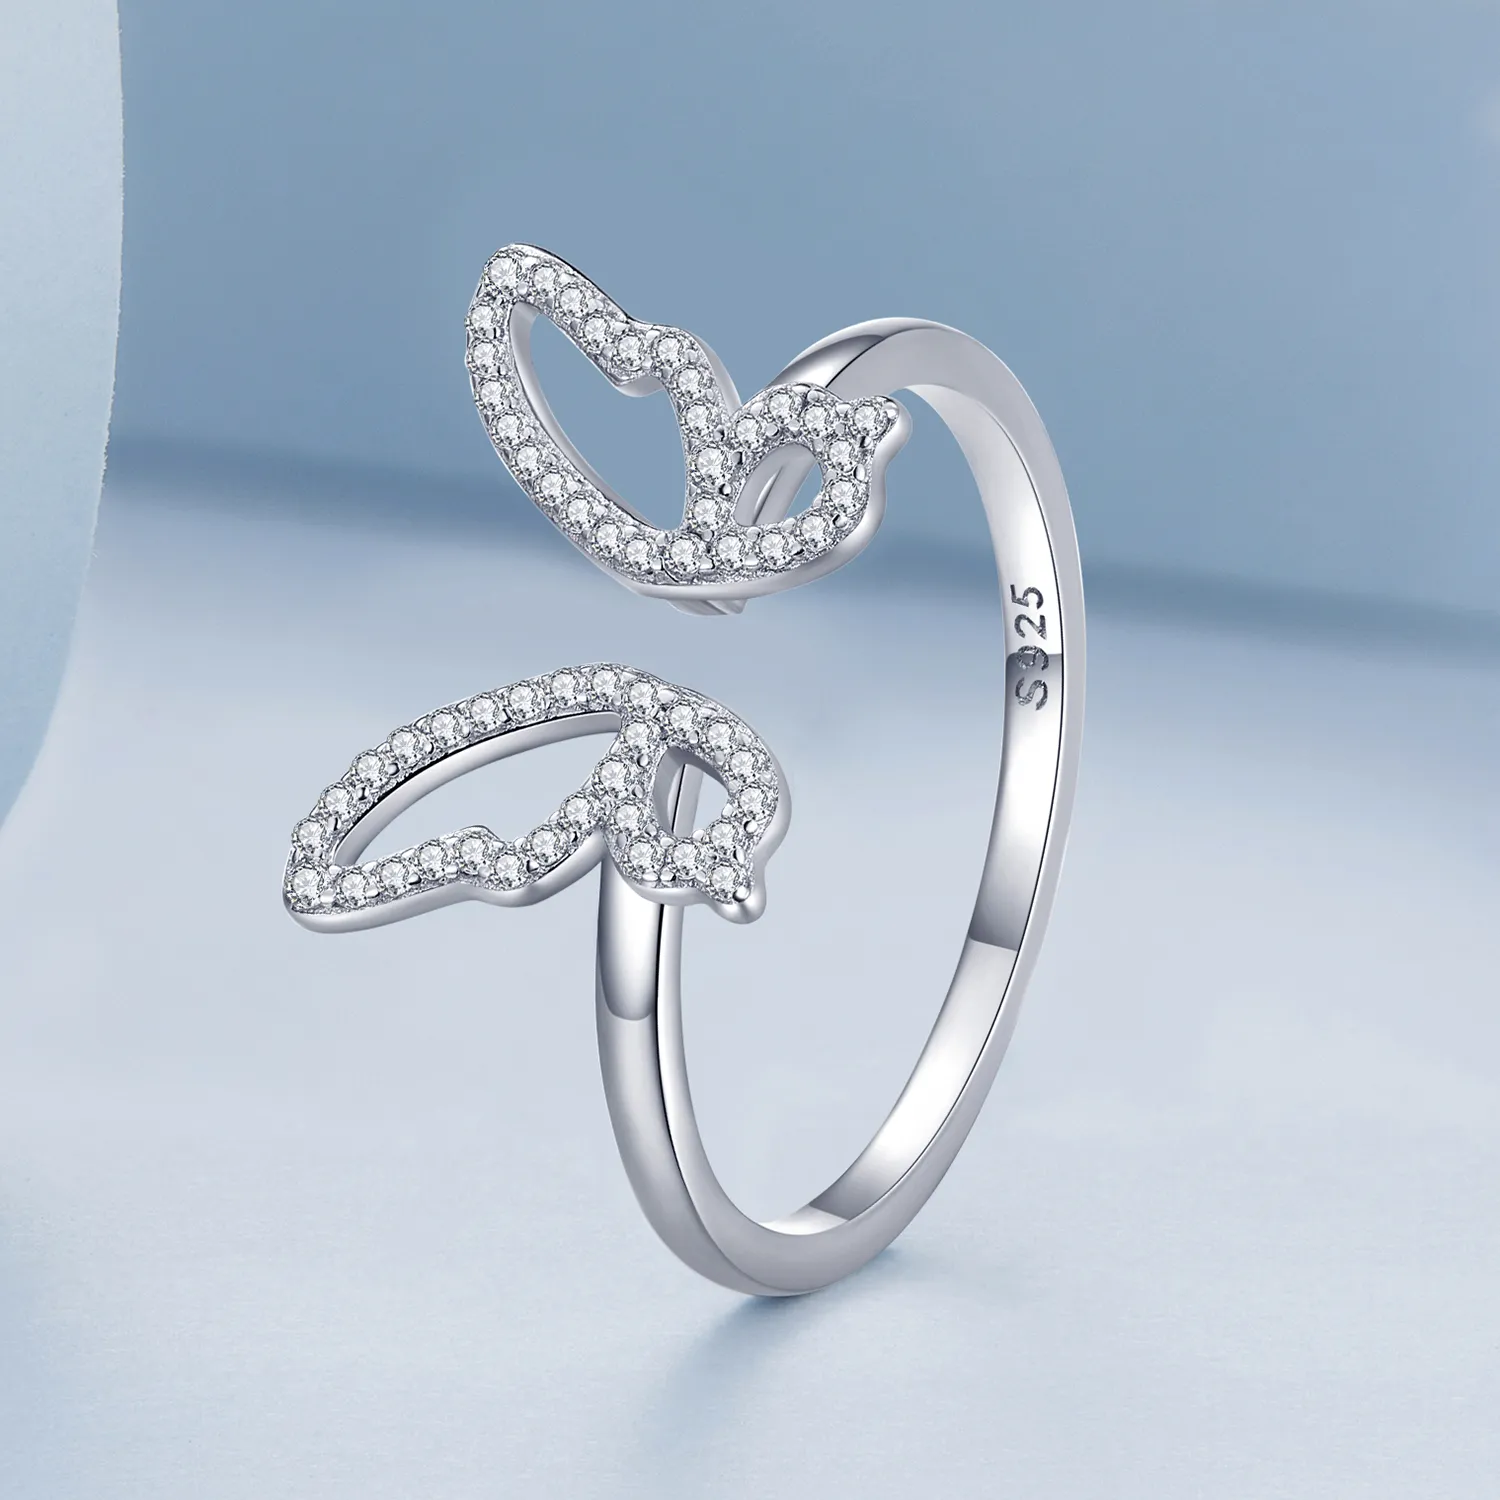 Pandora Style Butterfly Open Ring - BSR278